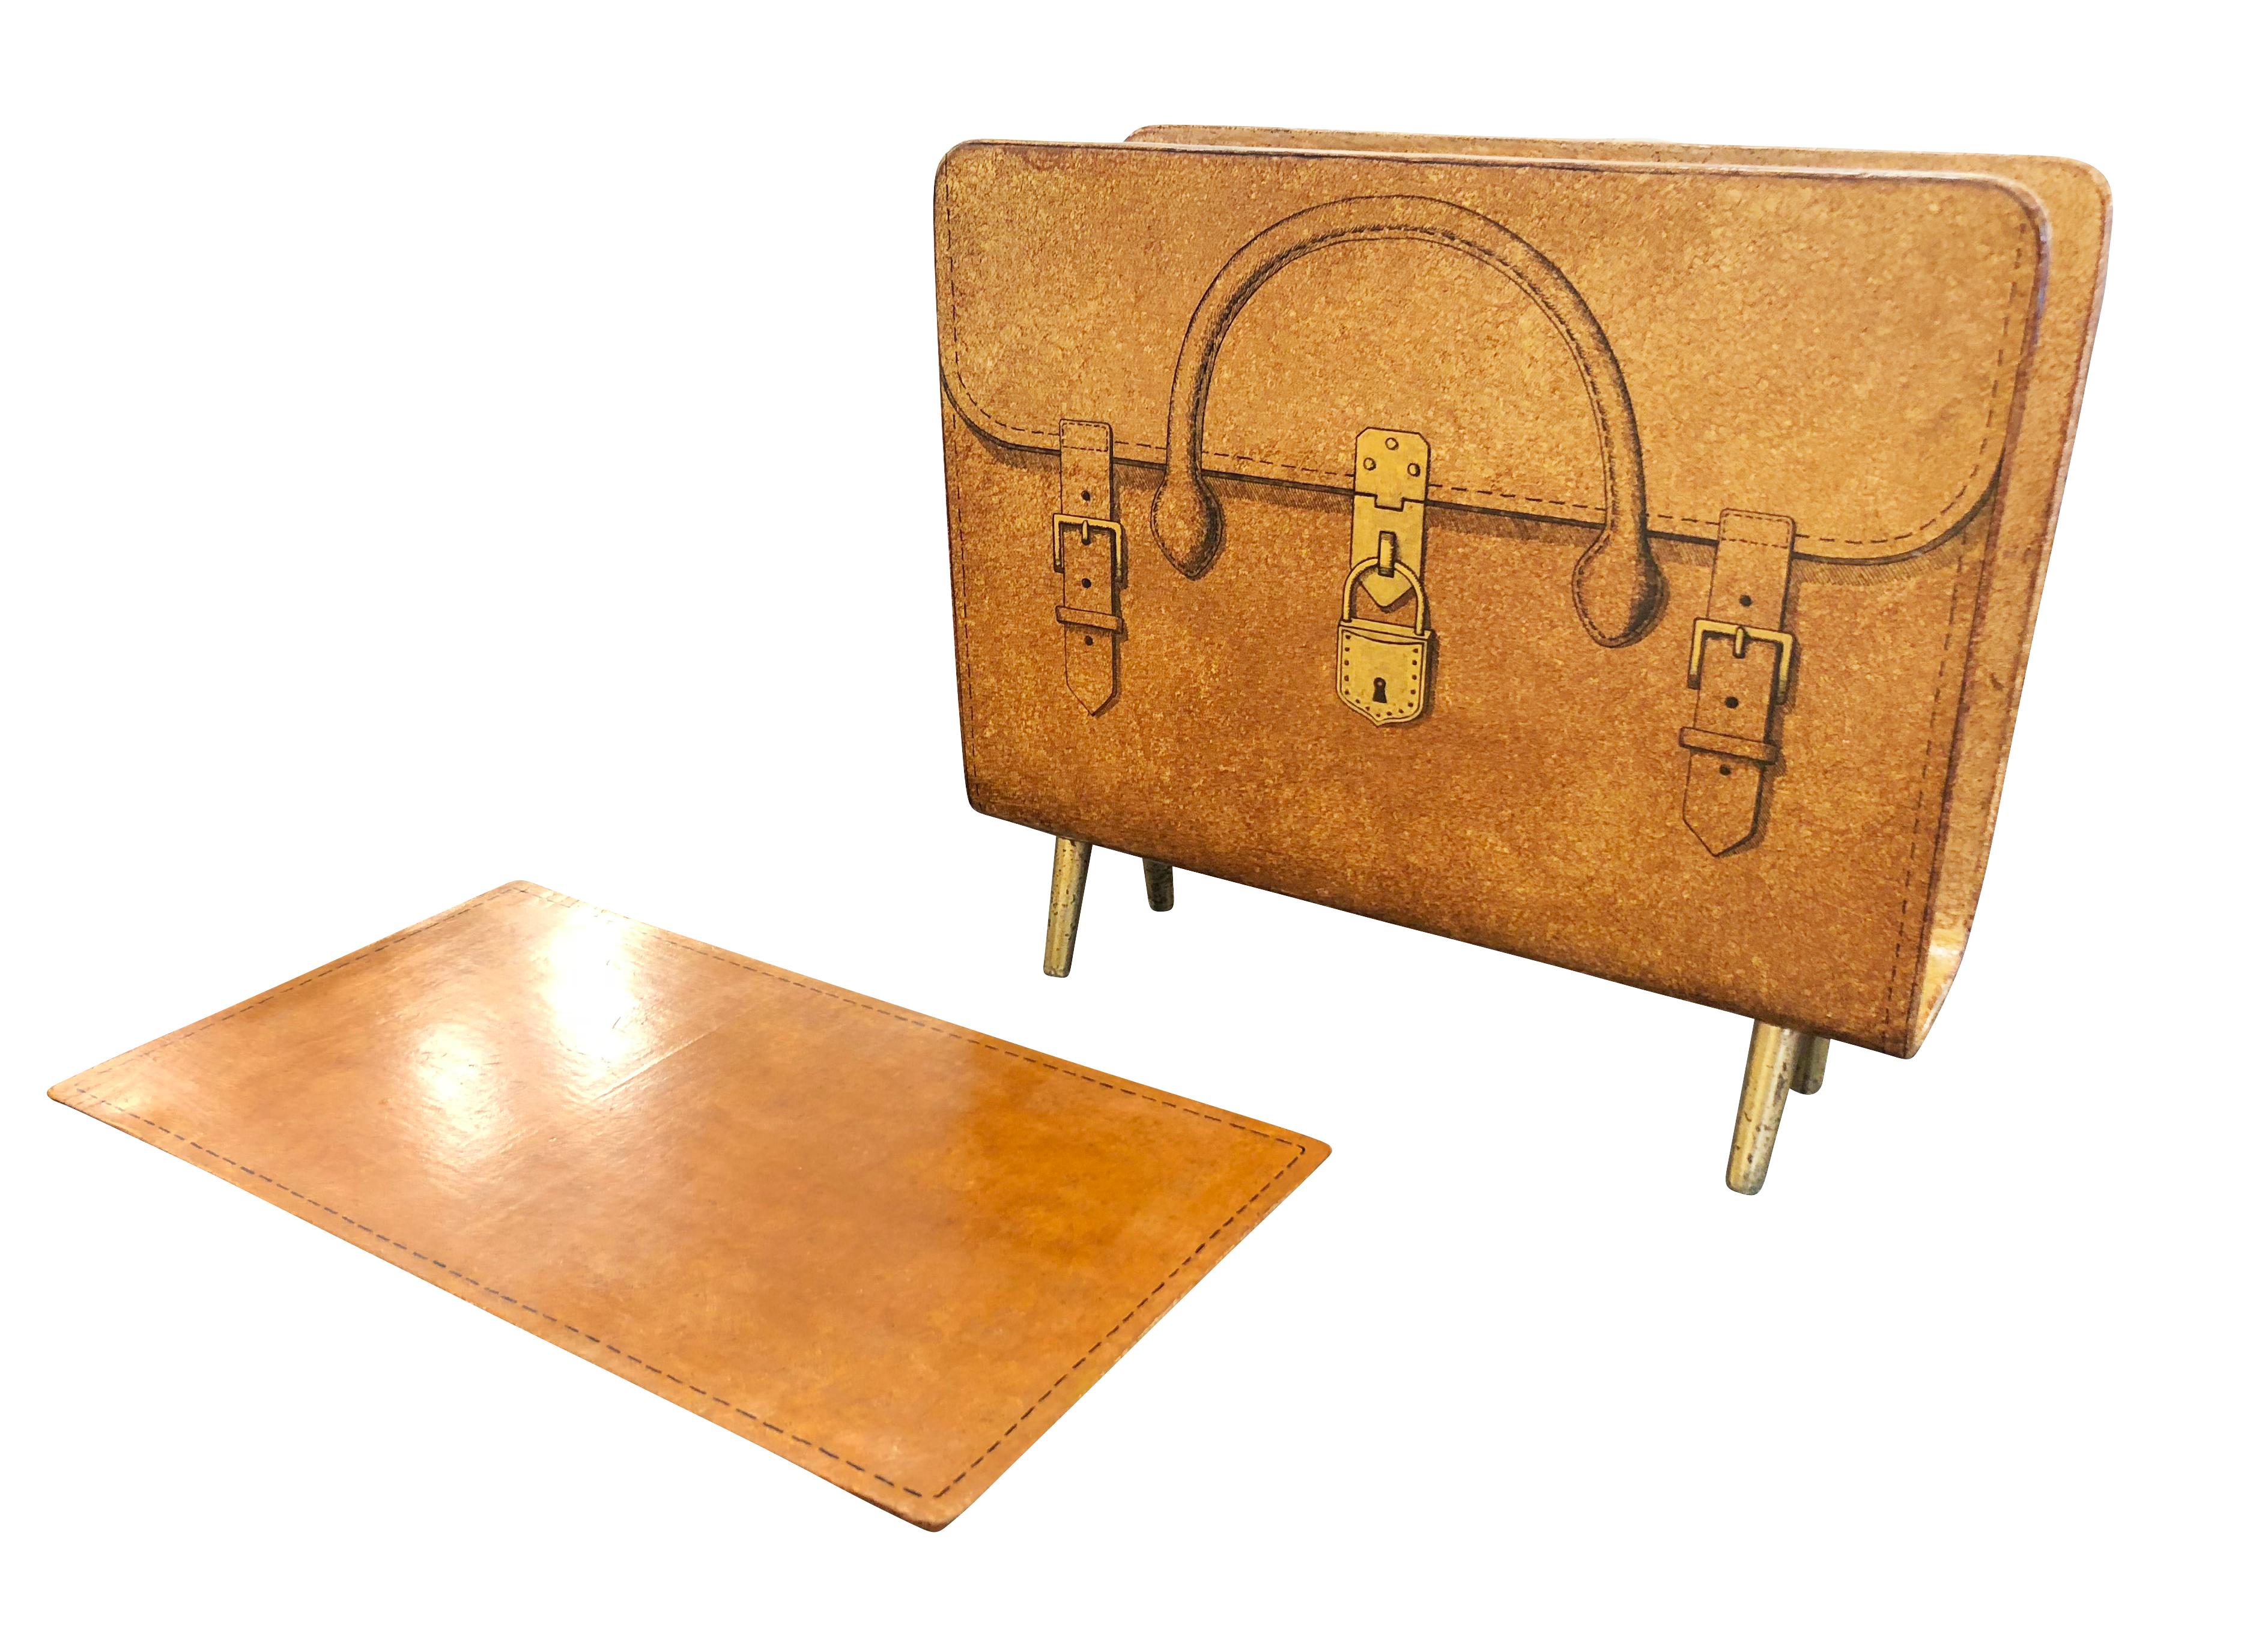 Playful magazine stand designed and manufactured by Piero Fornasetti in the 1950s. Lithographic transfer print of a leather briefcase on wood. Has brass legs and comes with a matching custom tray made by a previous owner. Cataloged.

Condition: